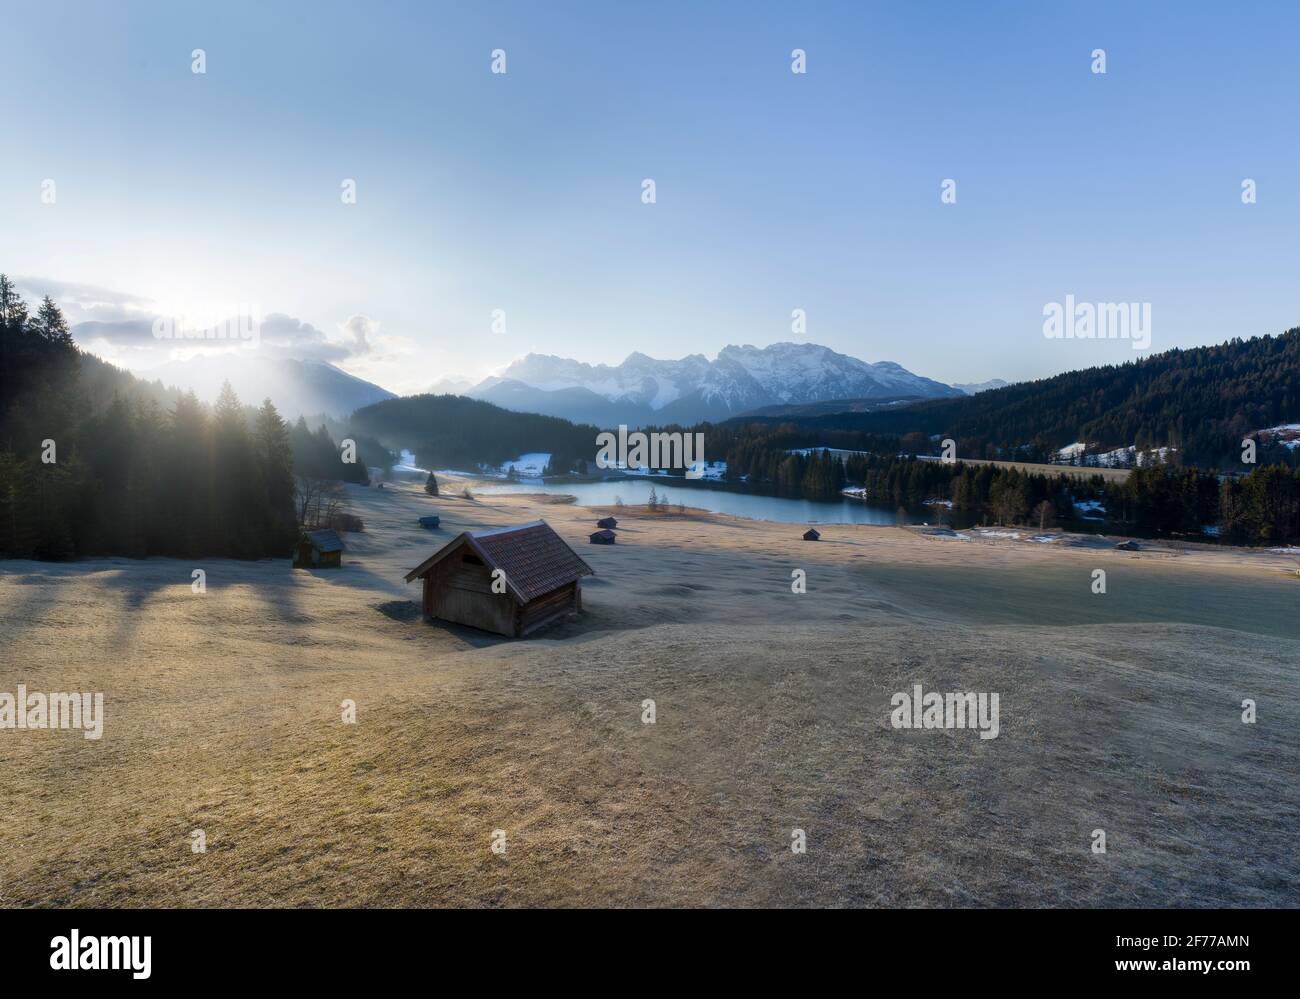 Beautiful Morning Light at Alpine Meadow with huts, lake and mountains Stock Photo